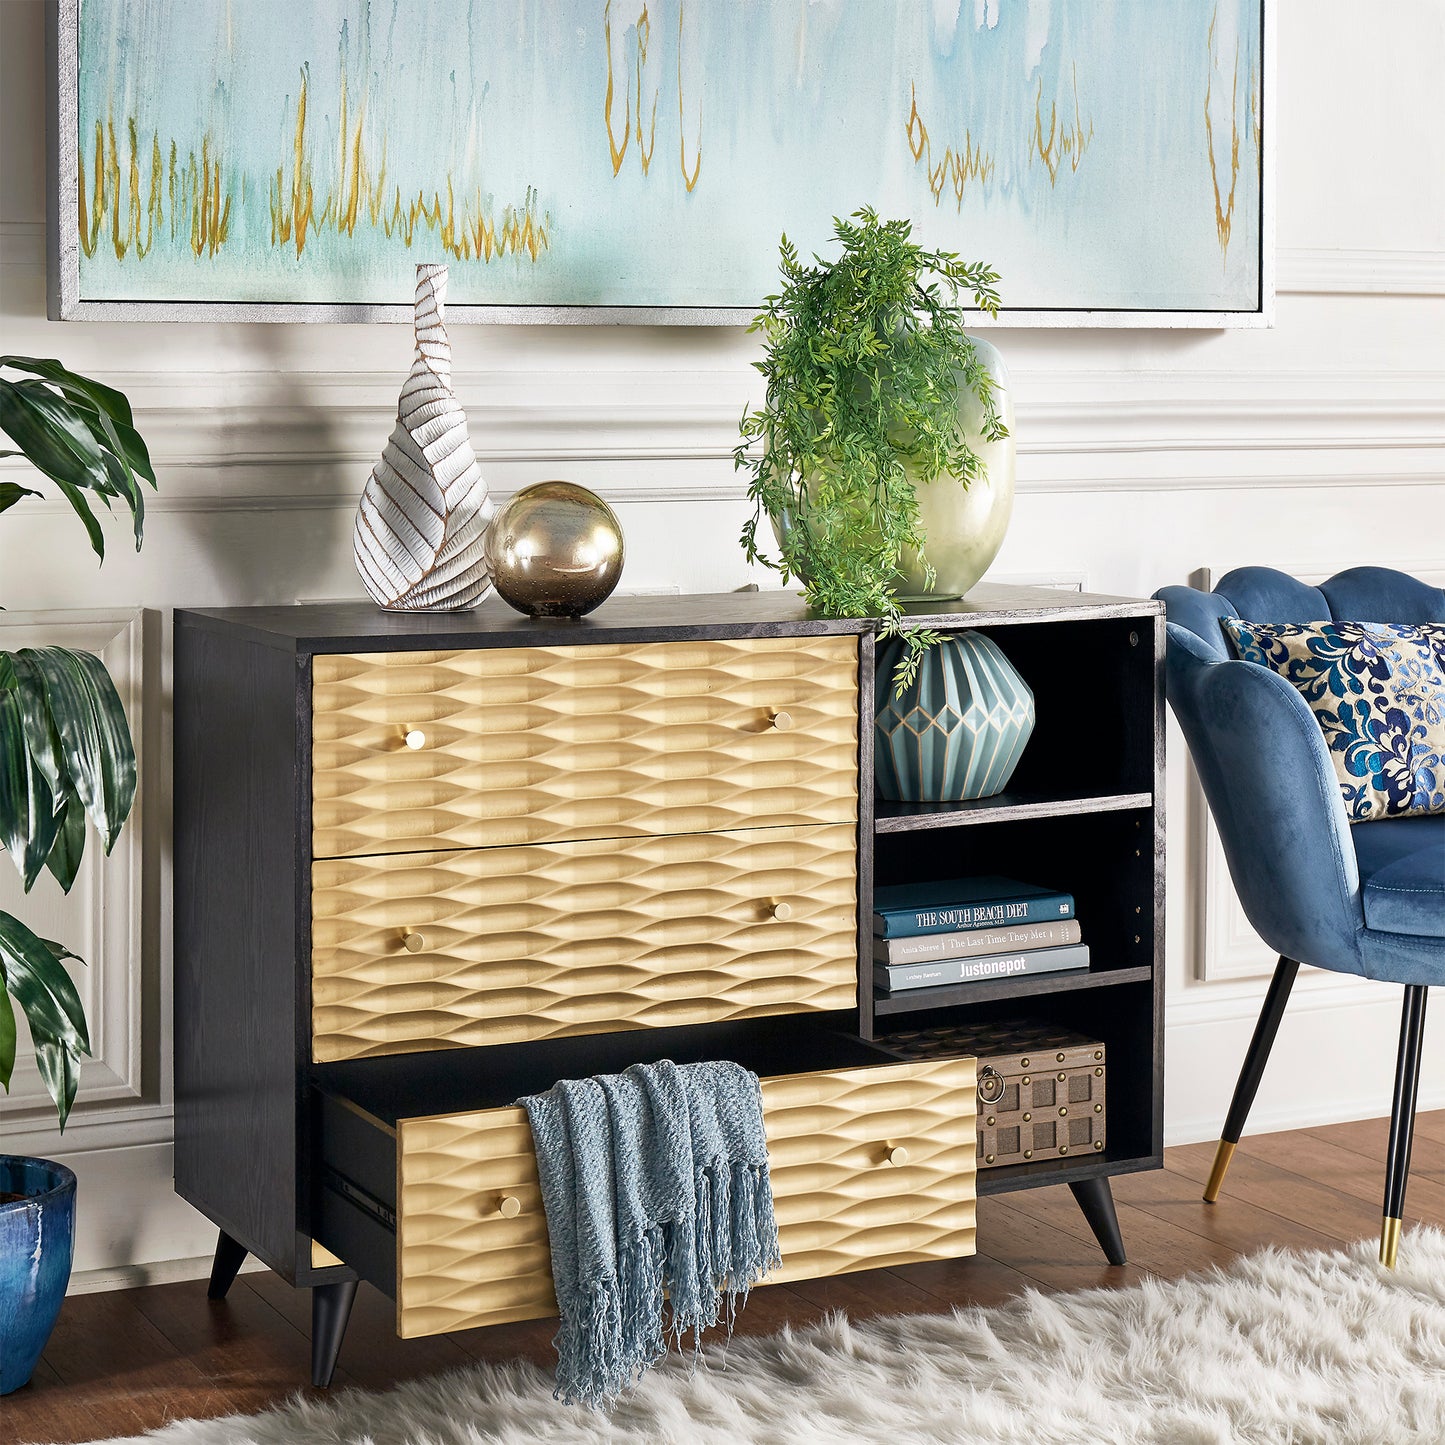 Two-Tone 3-Drawer Accent Chest